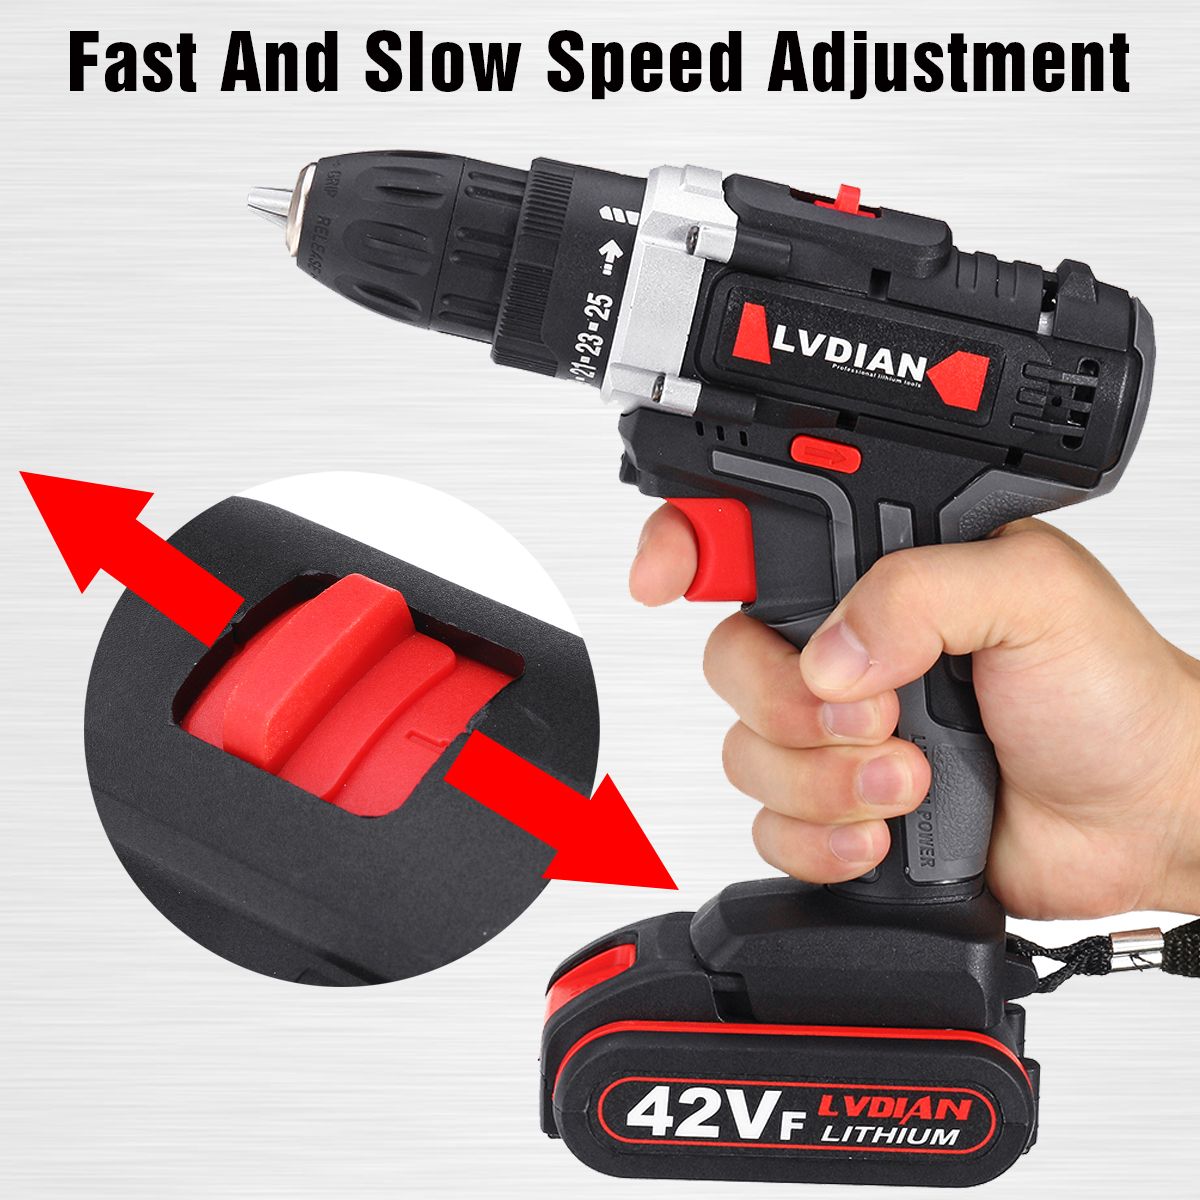 42VF-Li-Ion-Battery-Cordless-Rechargeable-Electric-Impact-Drill-Driver-Screwdriver-LED-Light-1563697